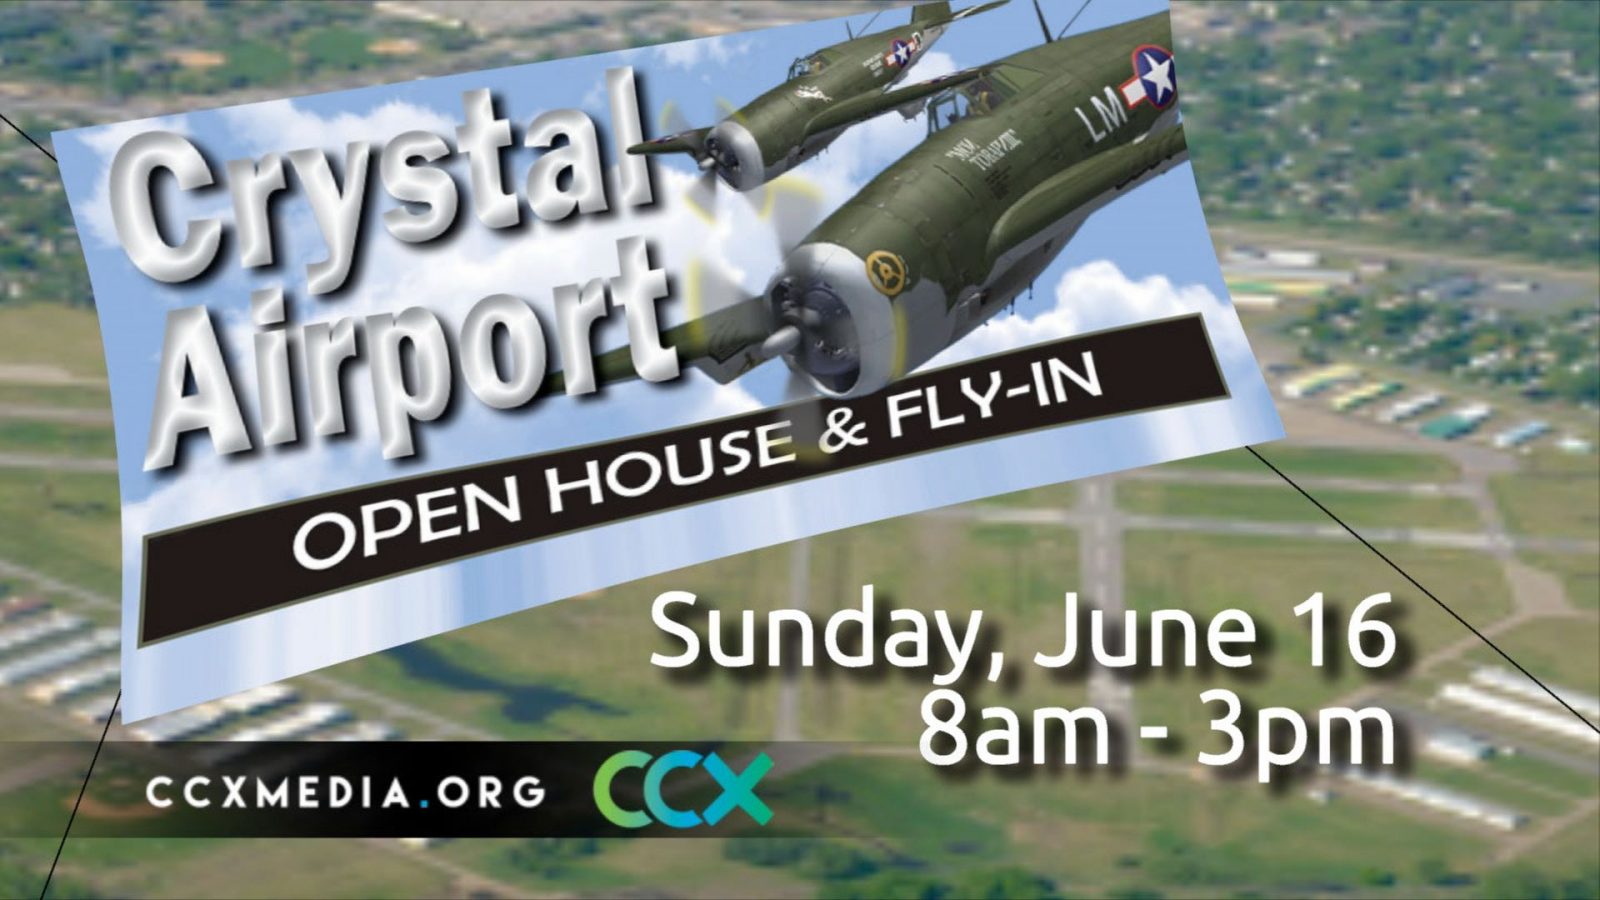 2019 CRYSTAL AIRPORT OPEN HOUSE & FLY IN - CCX Media